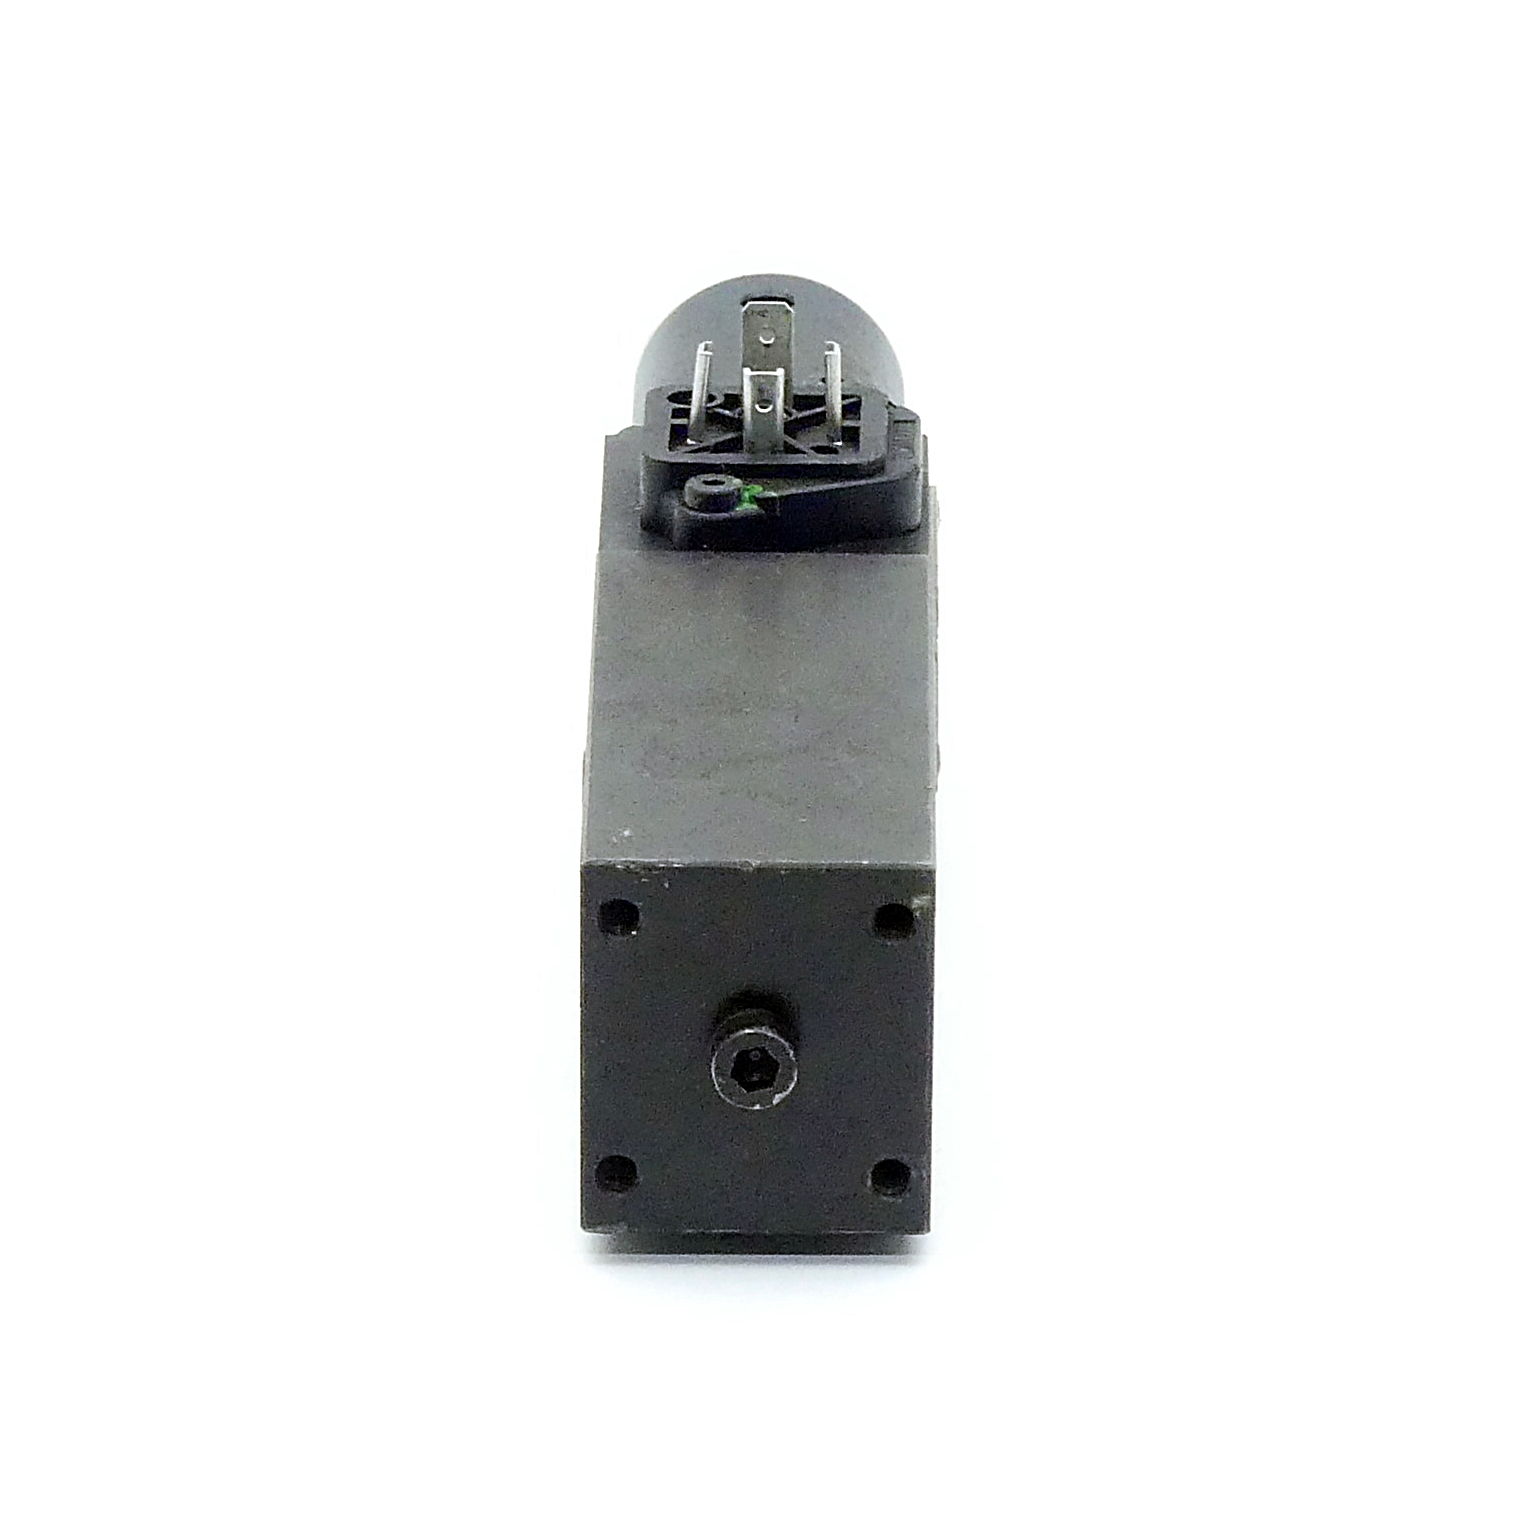 Pressure switch PSB040AF1A4 with baffle plate H06PSB-994 